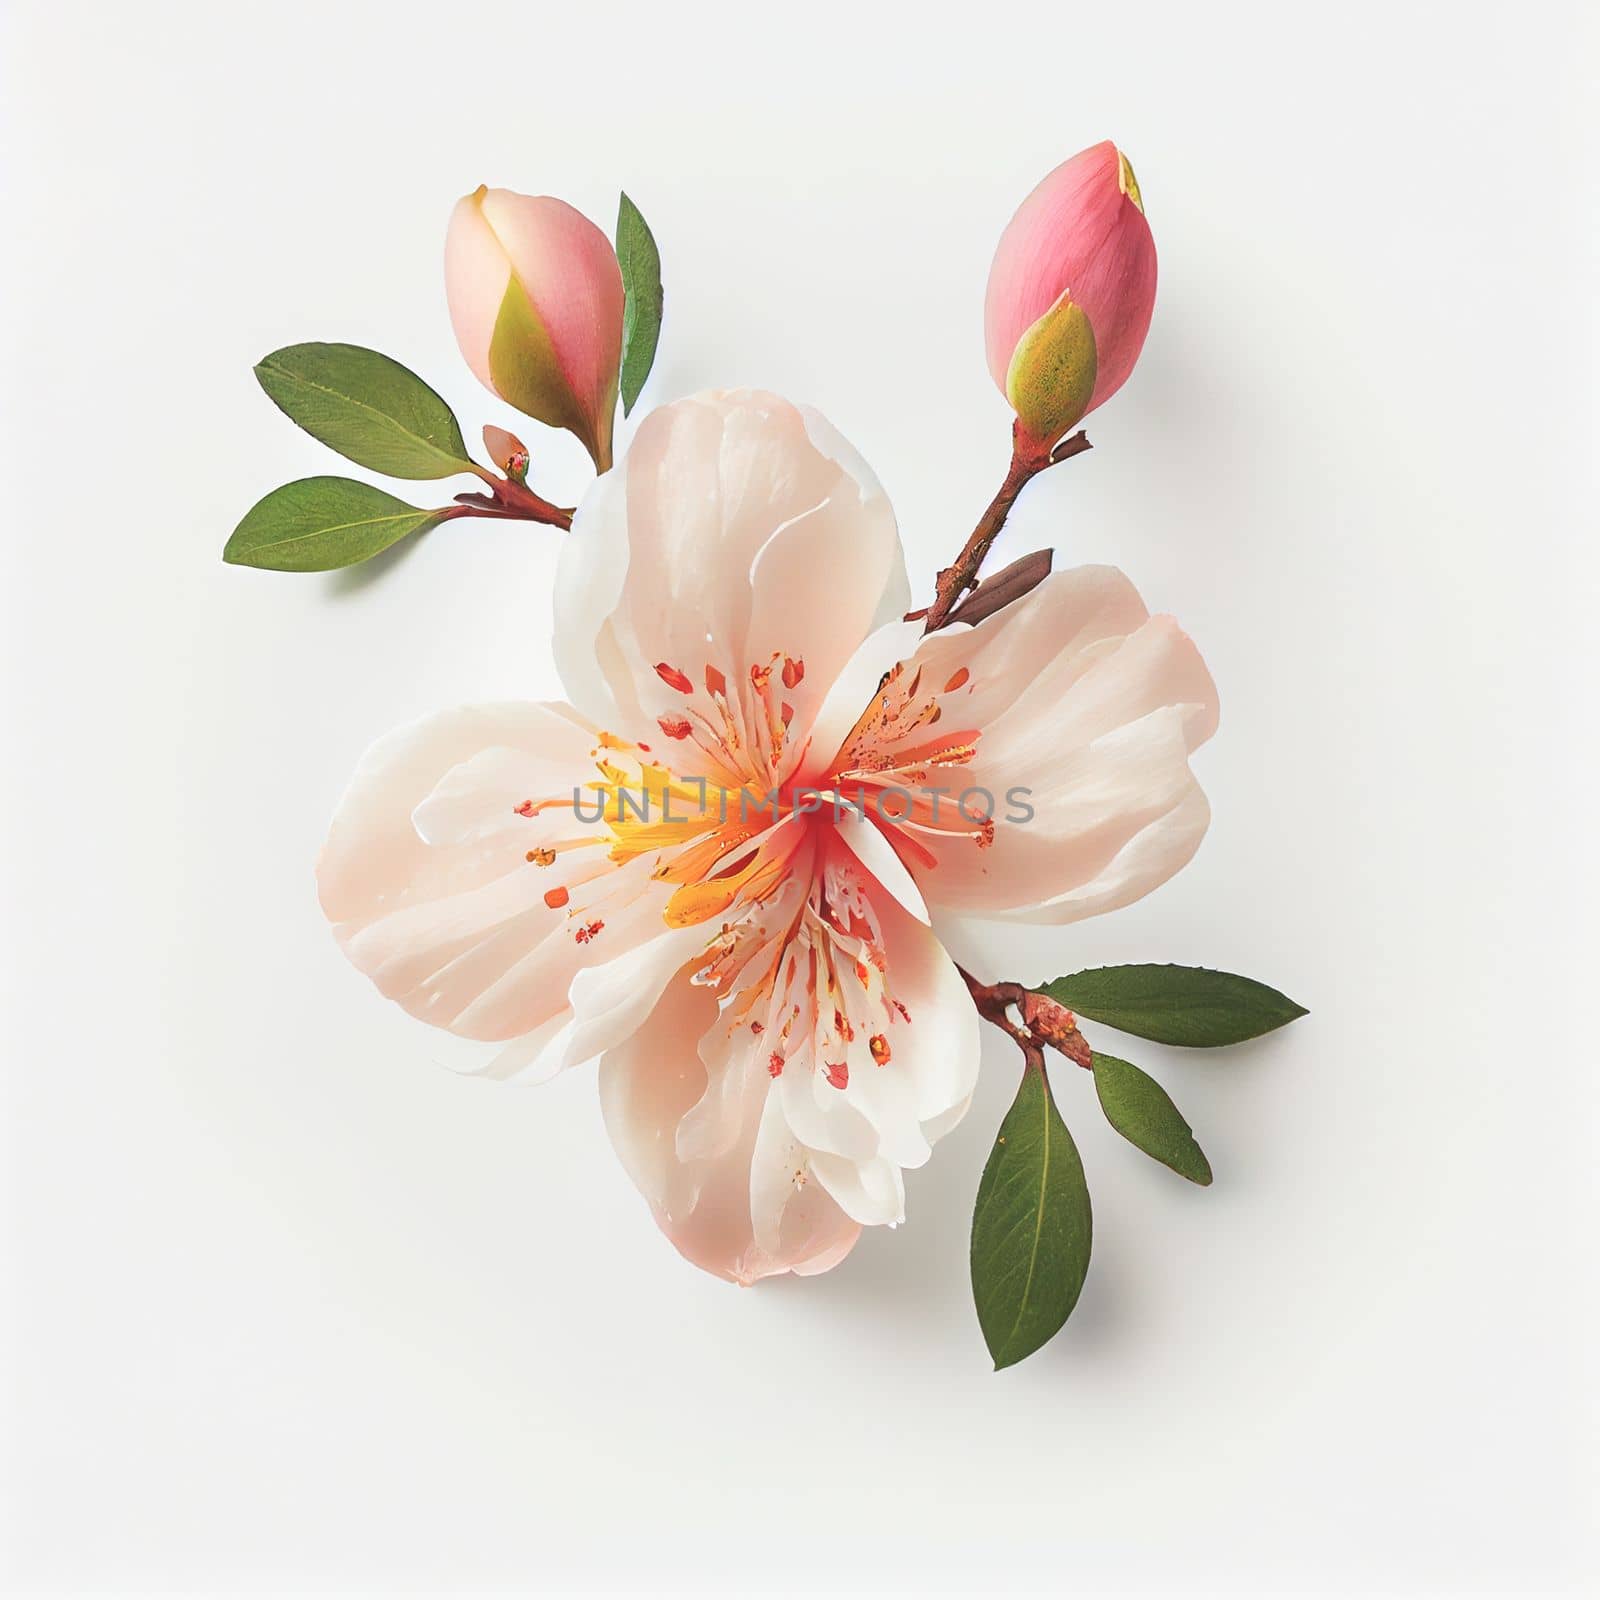 Top view a Peach blossom flower isolated on a white background, suitable for use on Valentine's Day cards, love letters, or springtime designs.